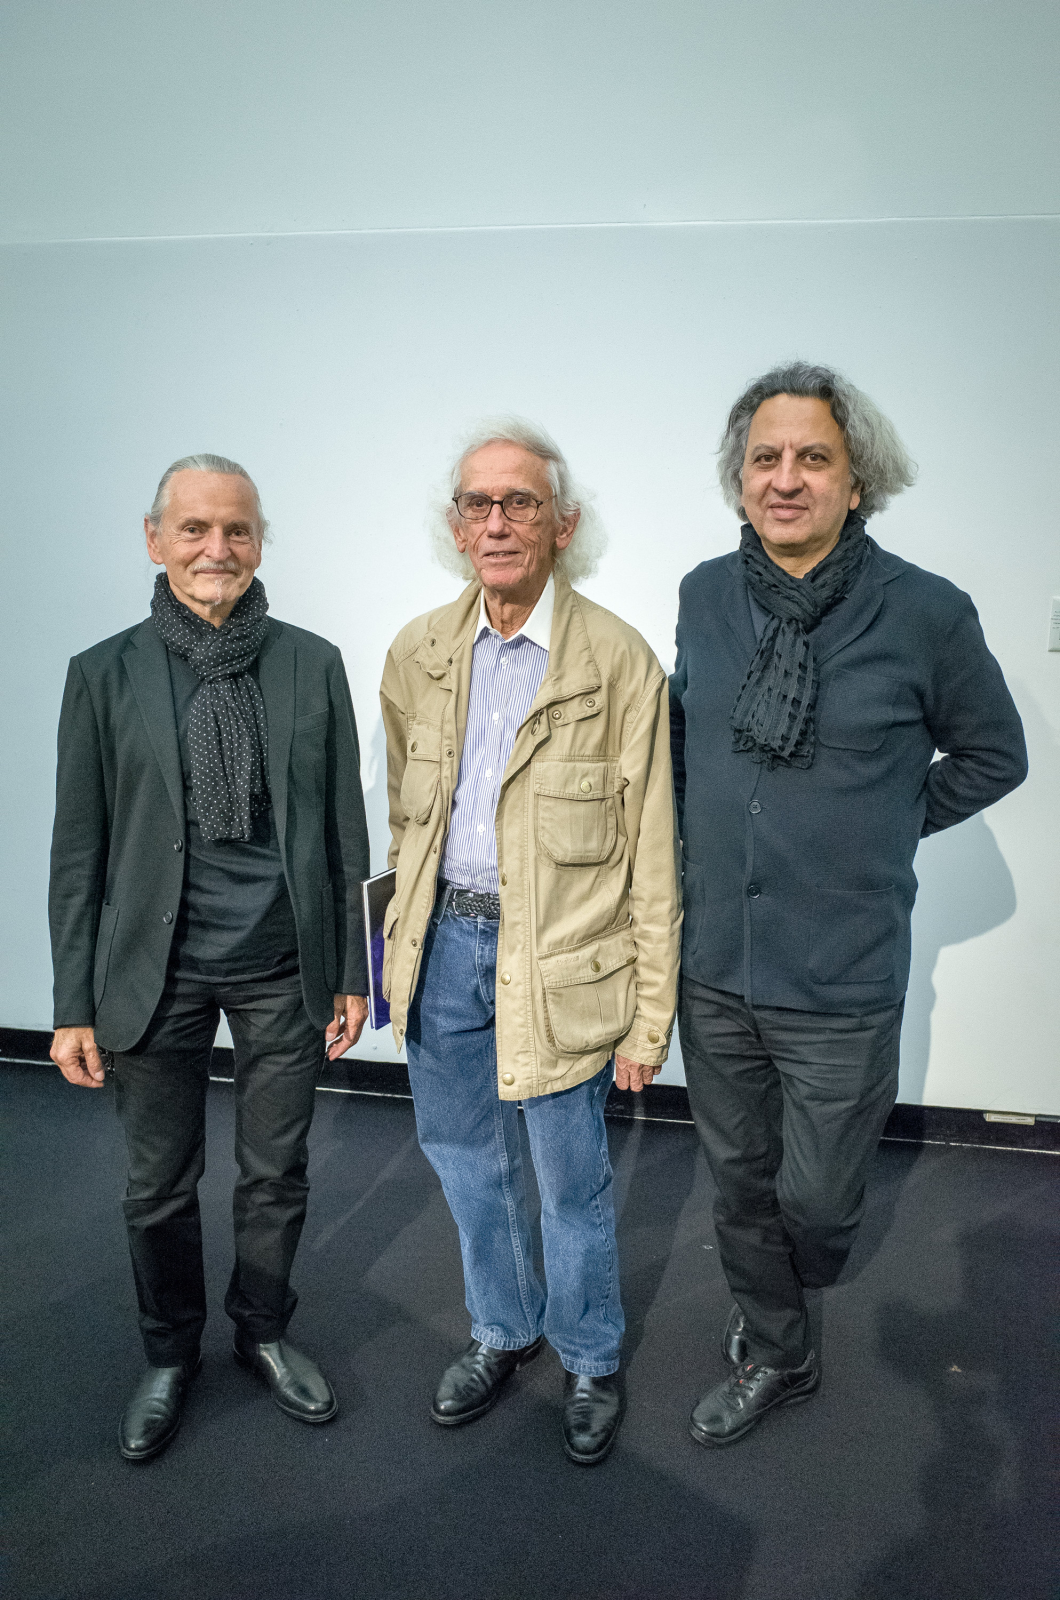 Krzysztof Wodiczko, professor in residence of art, design and the public domain; Christo; and Mohsen Mostafavi, Dean and Alexander and Victoria Wiley Professor of Design, following Christo's lecture at the GSD on October 27, 2016